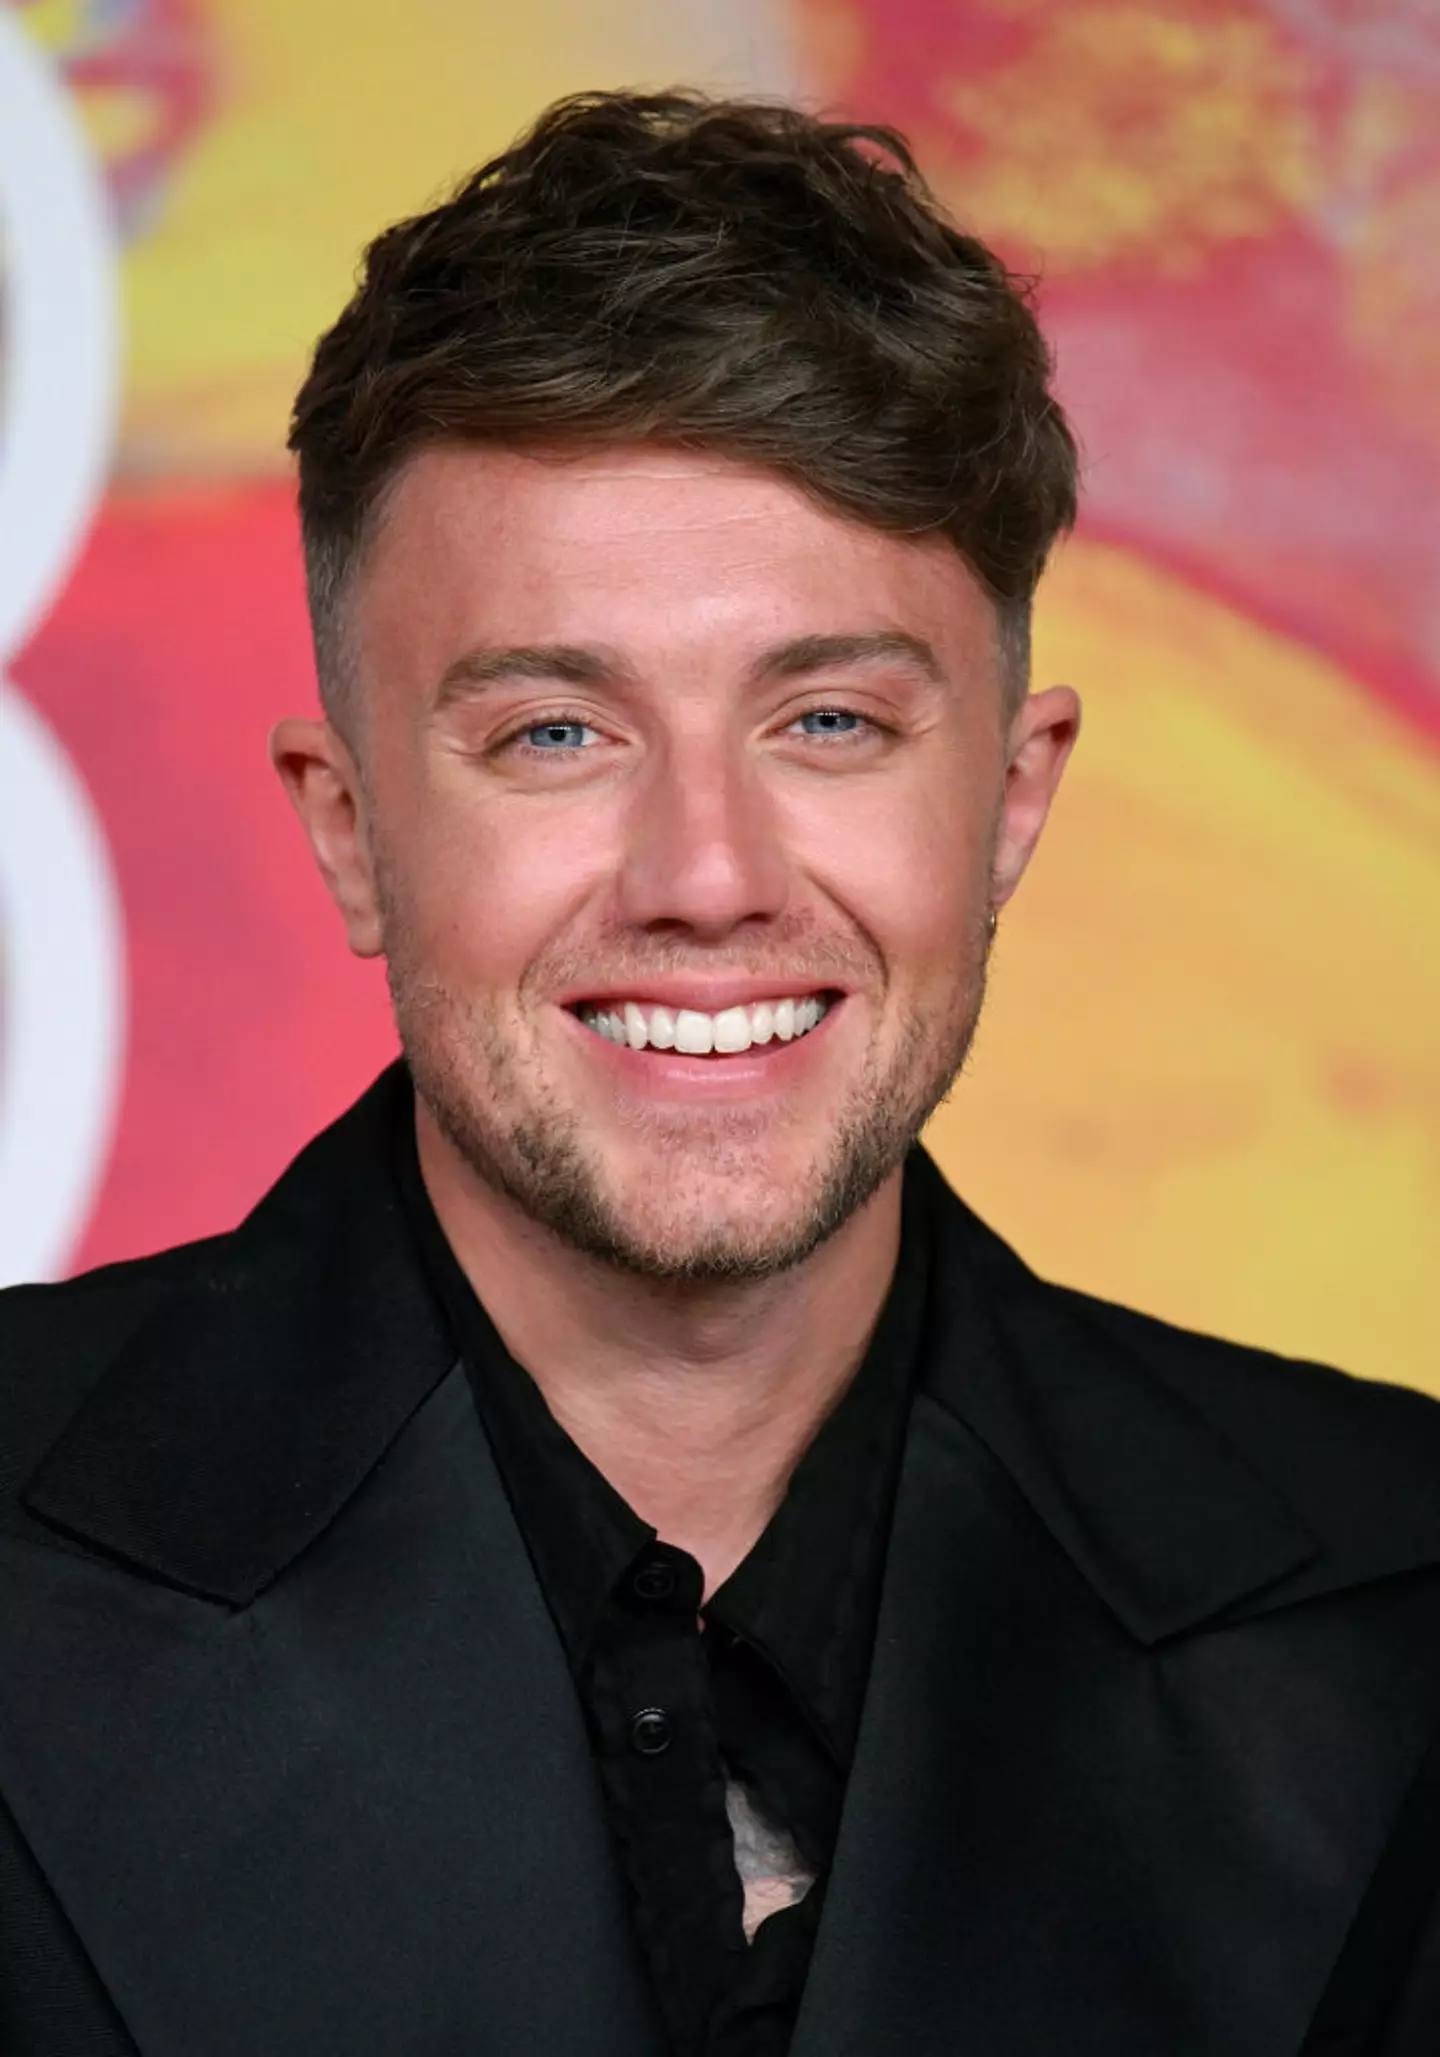 Roman Kemp has opened up about the tragic reason behind his departure from Capital FM.